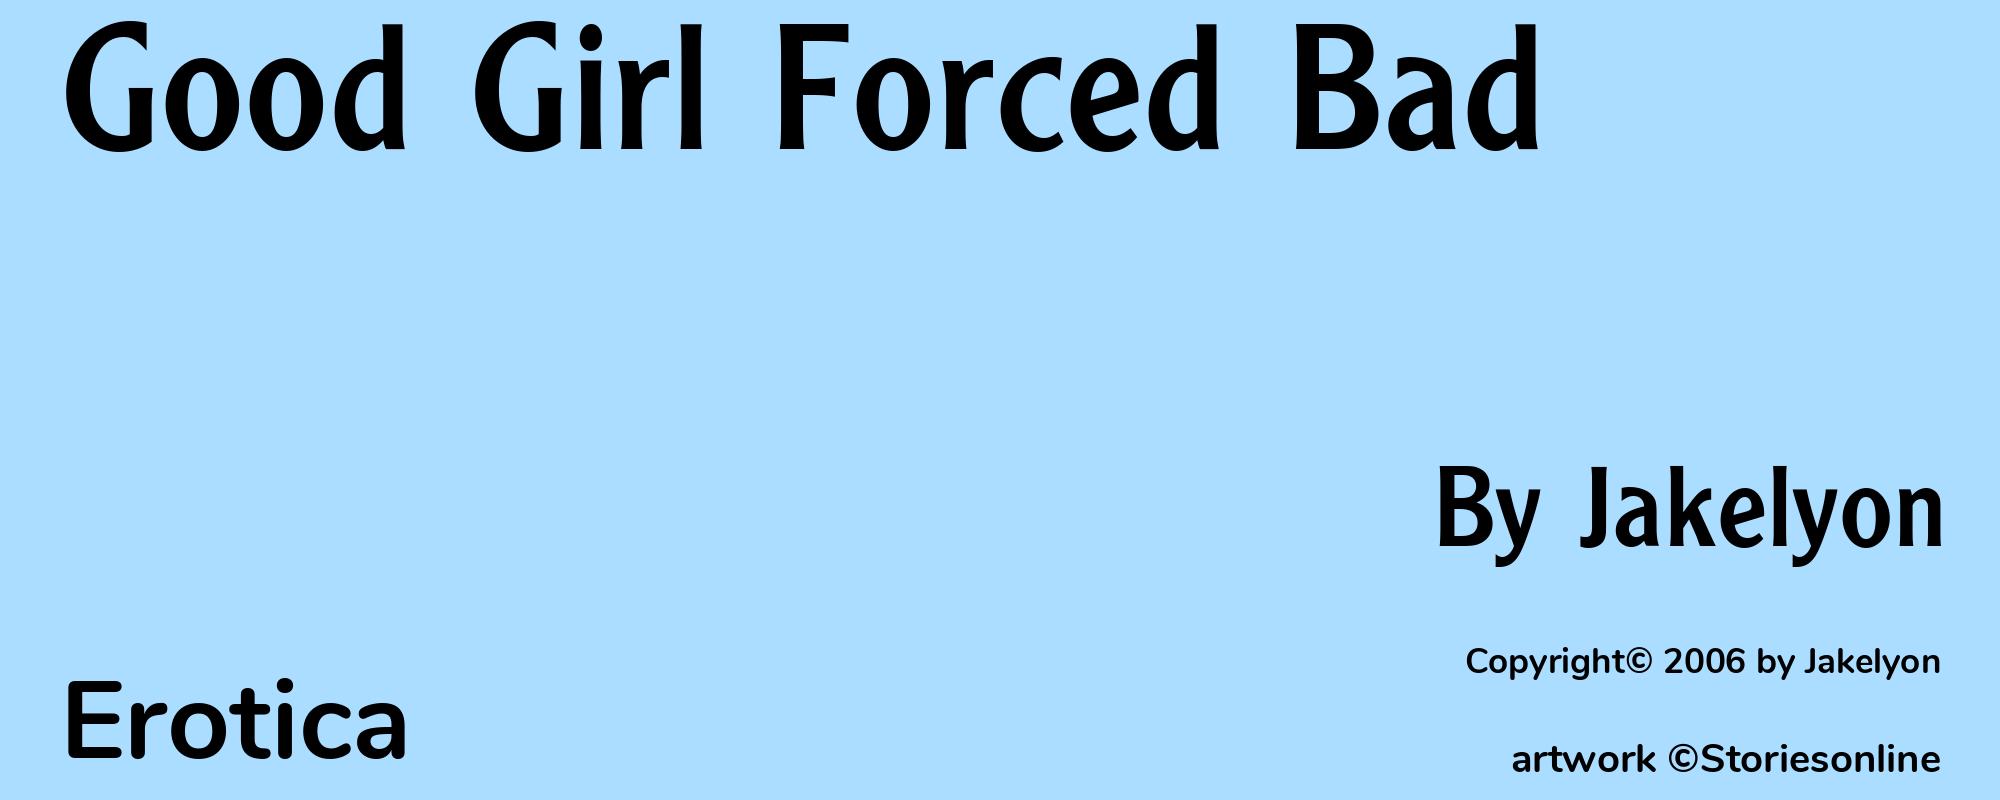 Good Girl Forced Bad - Cover